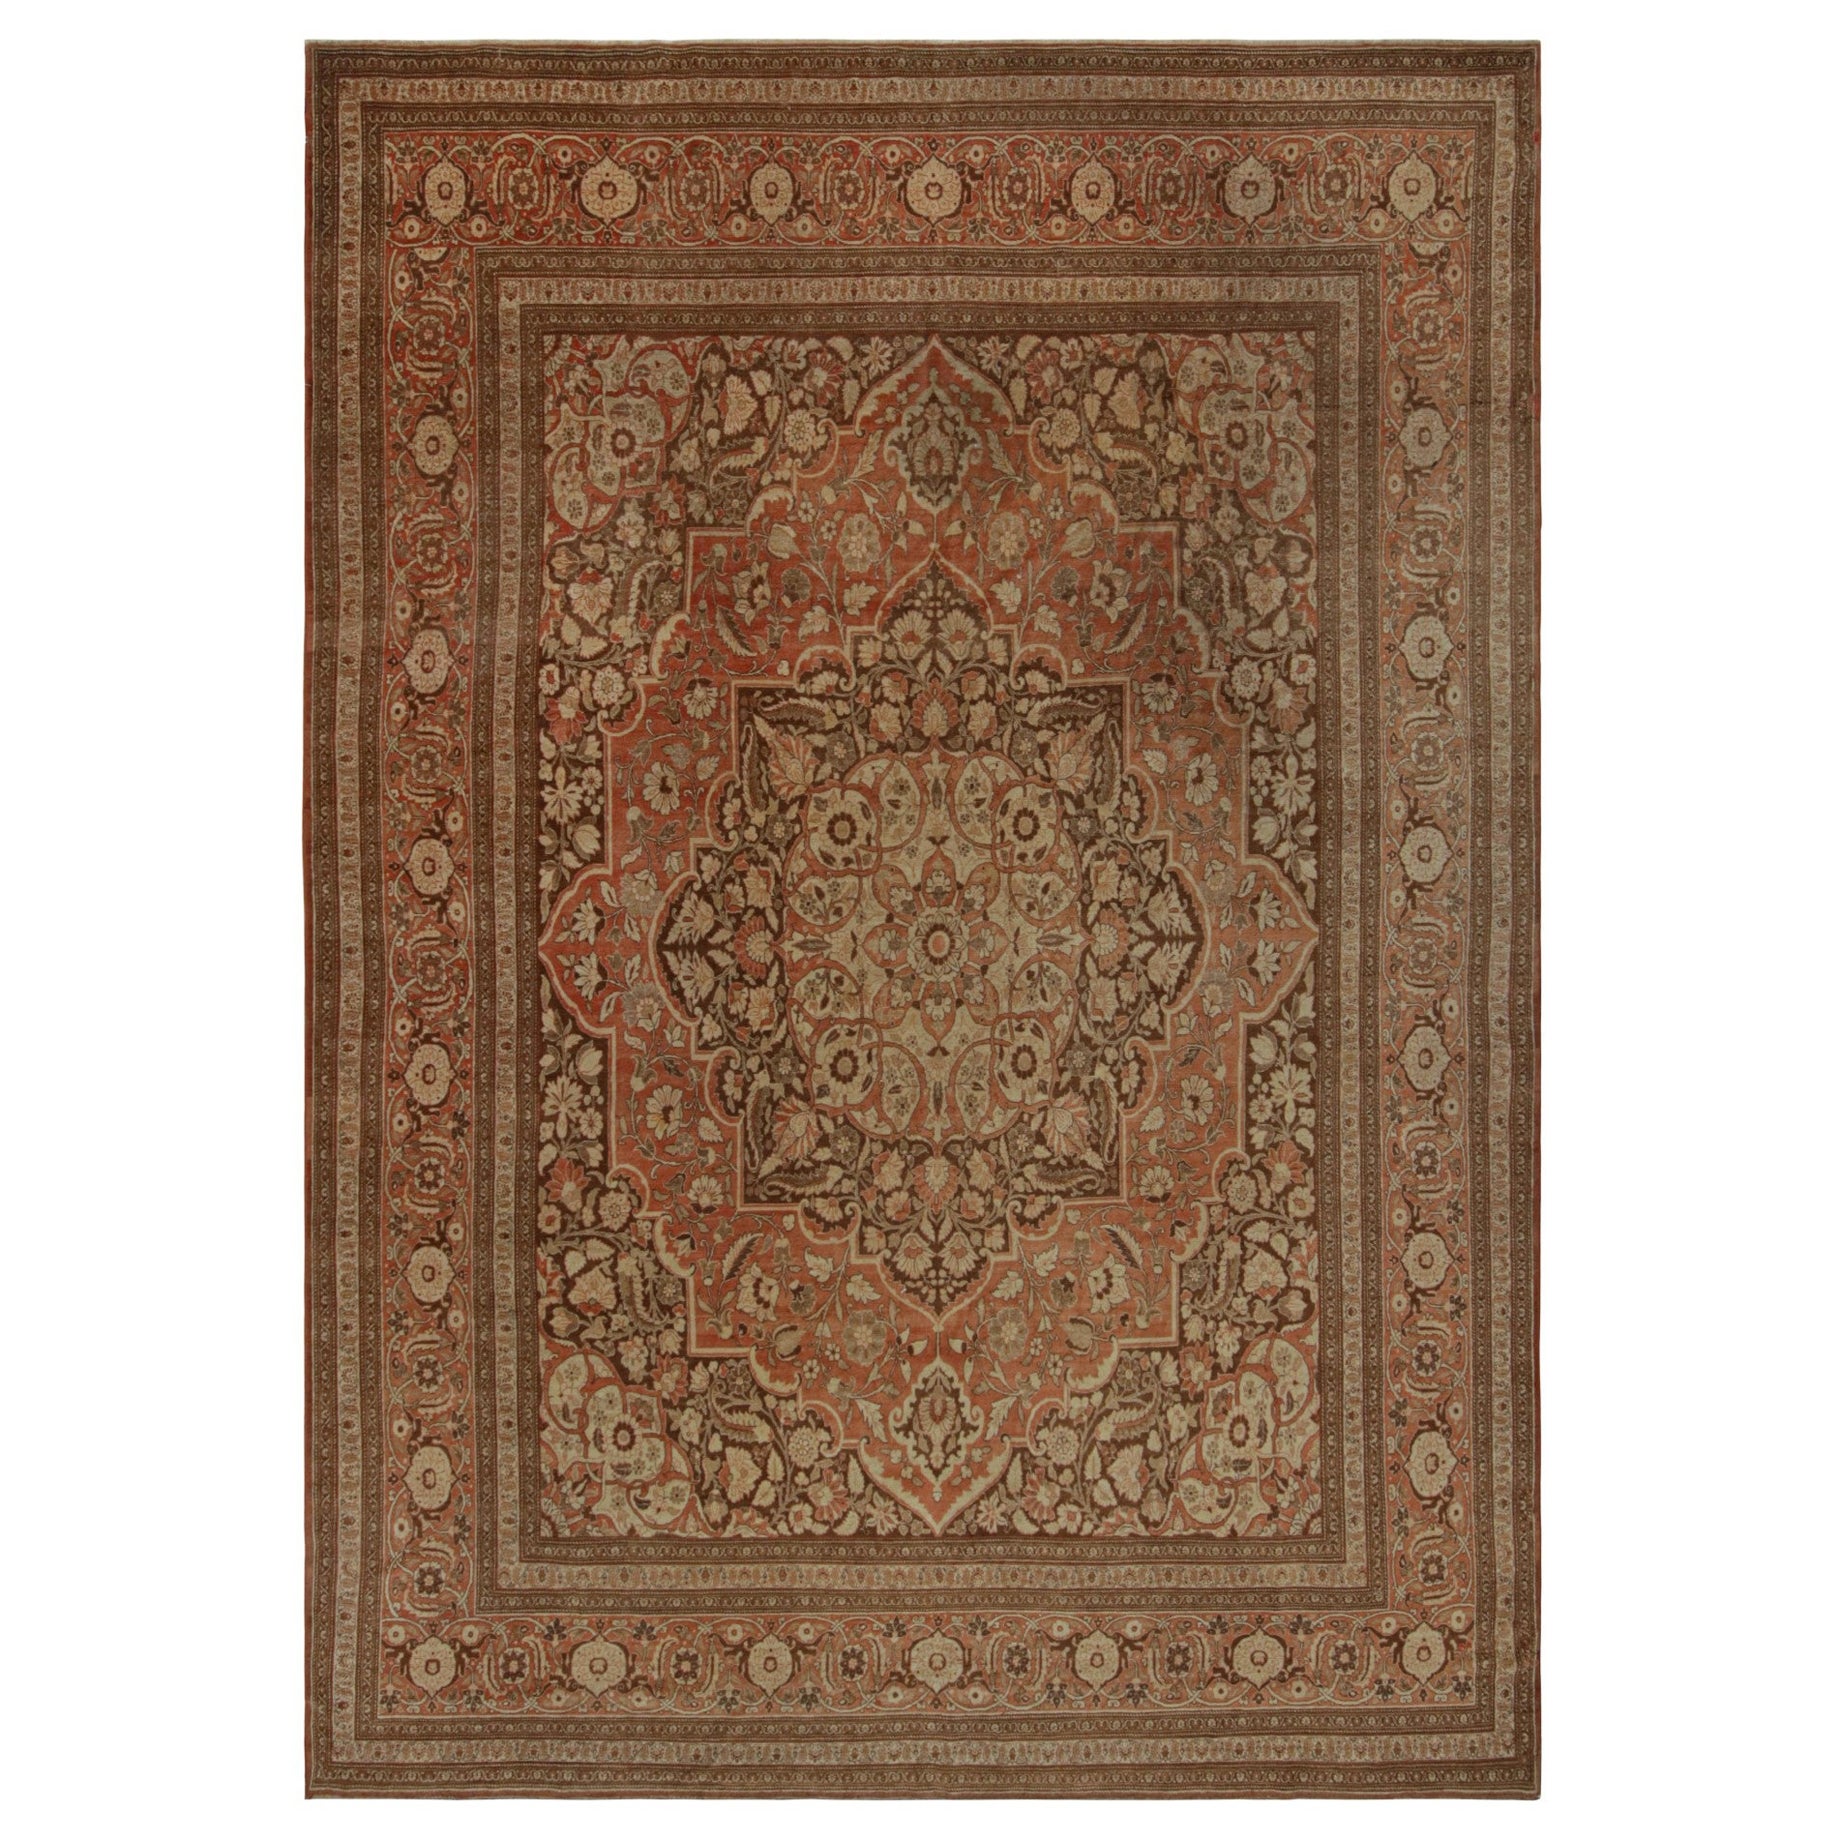 Antique Persian Tabriz Rug, with Floral Patterns, from Rug & Kilim For Sale